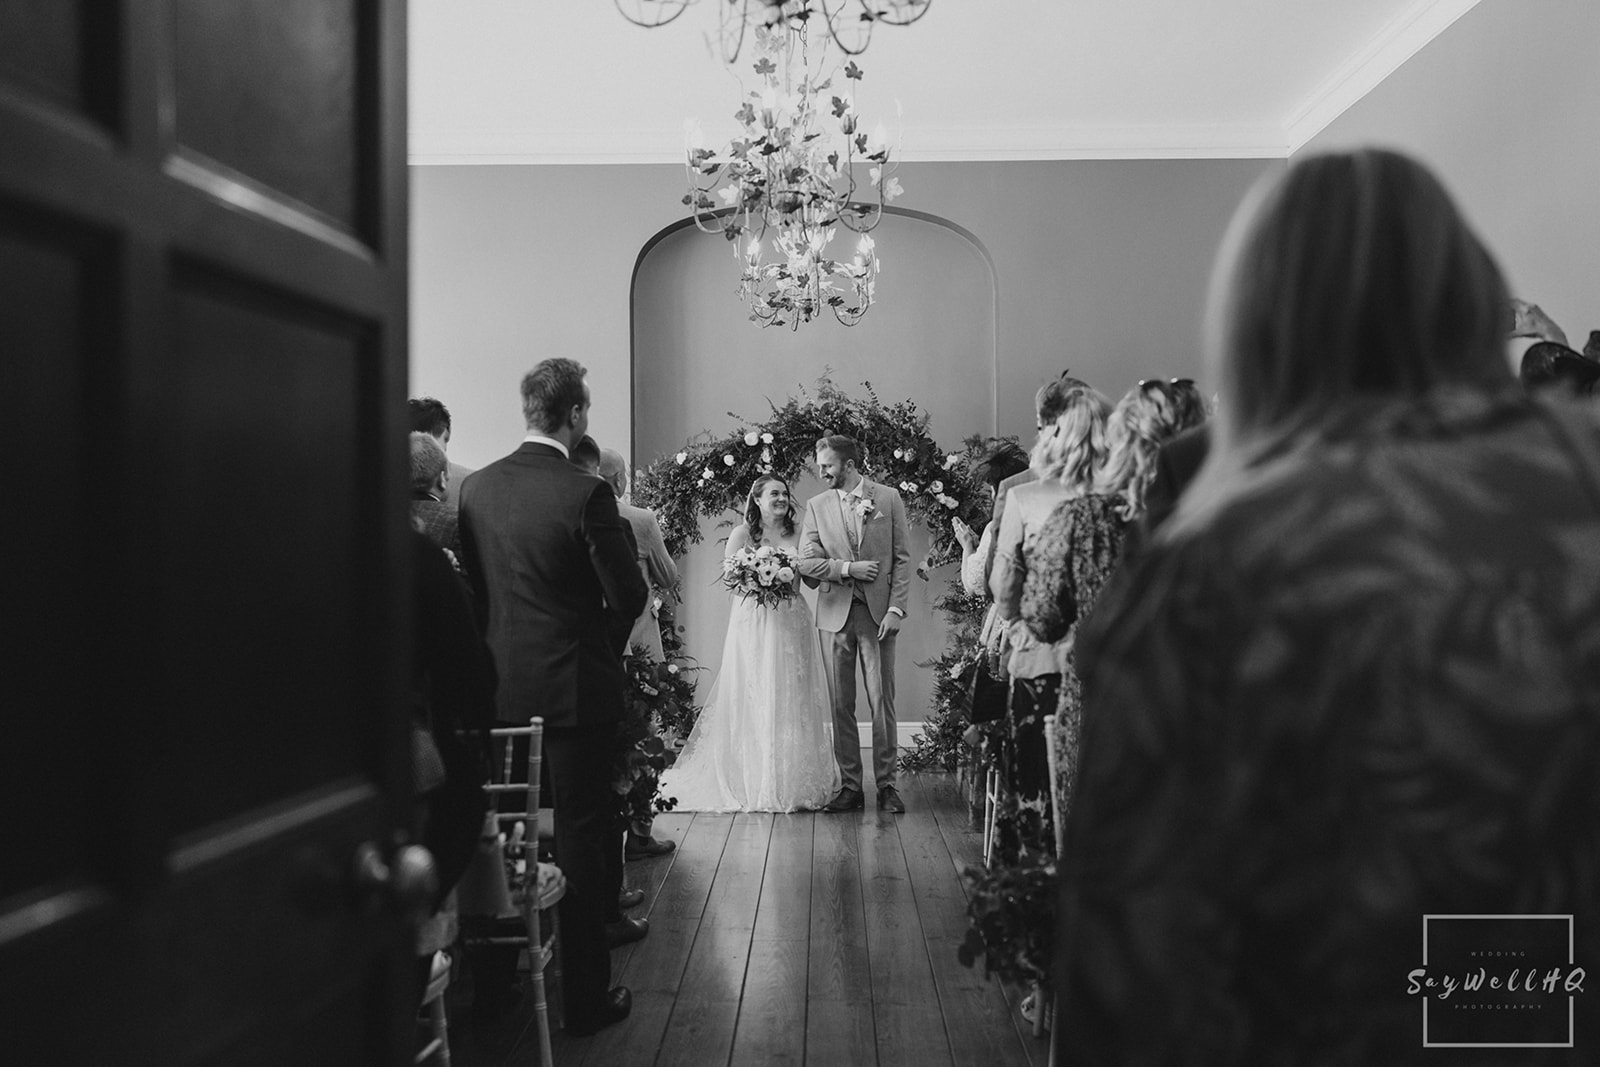 Documentary Wedding Photography Portfolio - bride and groom waiting to walk down the wedding aisle at Hodsock priory